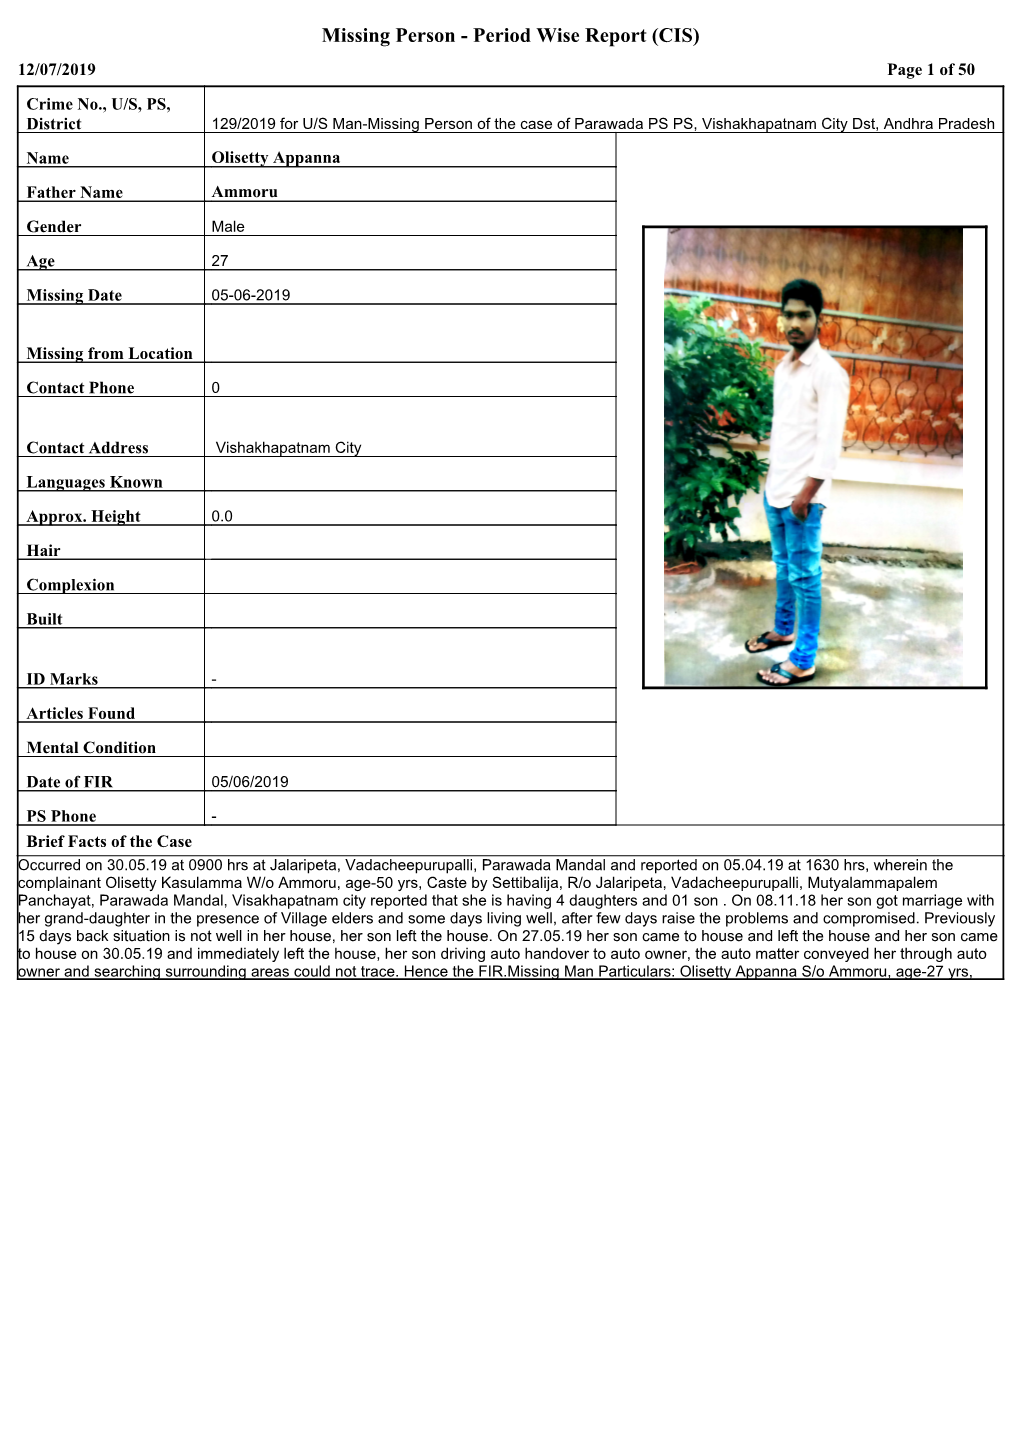 Missing Person - Period Wise Report (CIS) 12/07/2019 Page 1 of 50